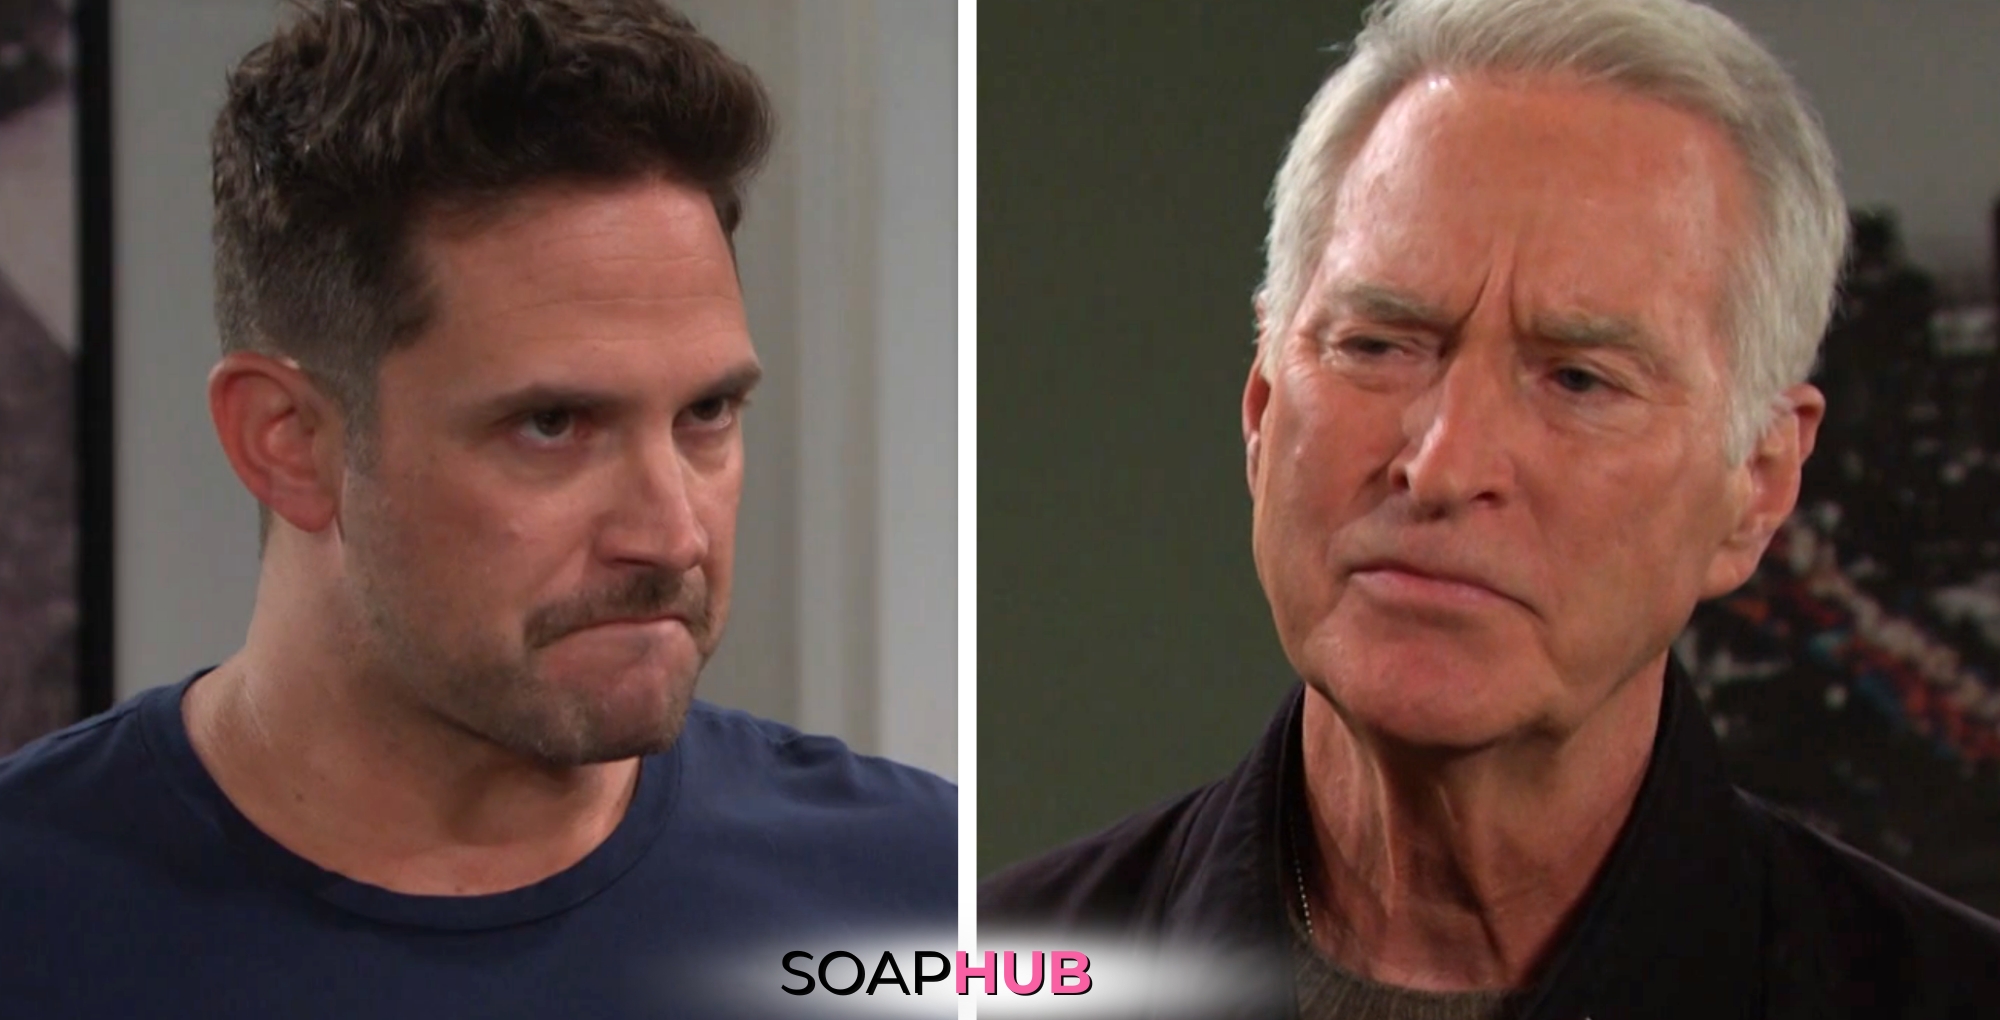 Days of our Lives spoilers for Friday, March 22 feature Stefan and John with the Soap Hub logo across the bottom.